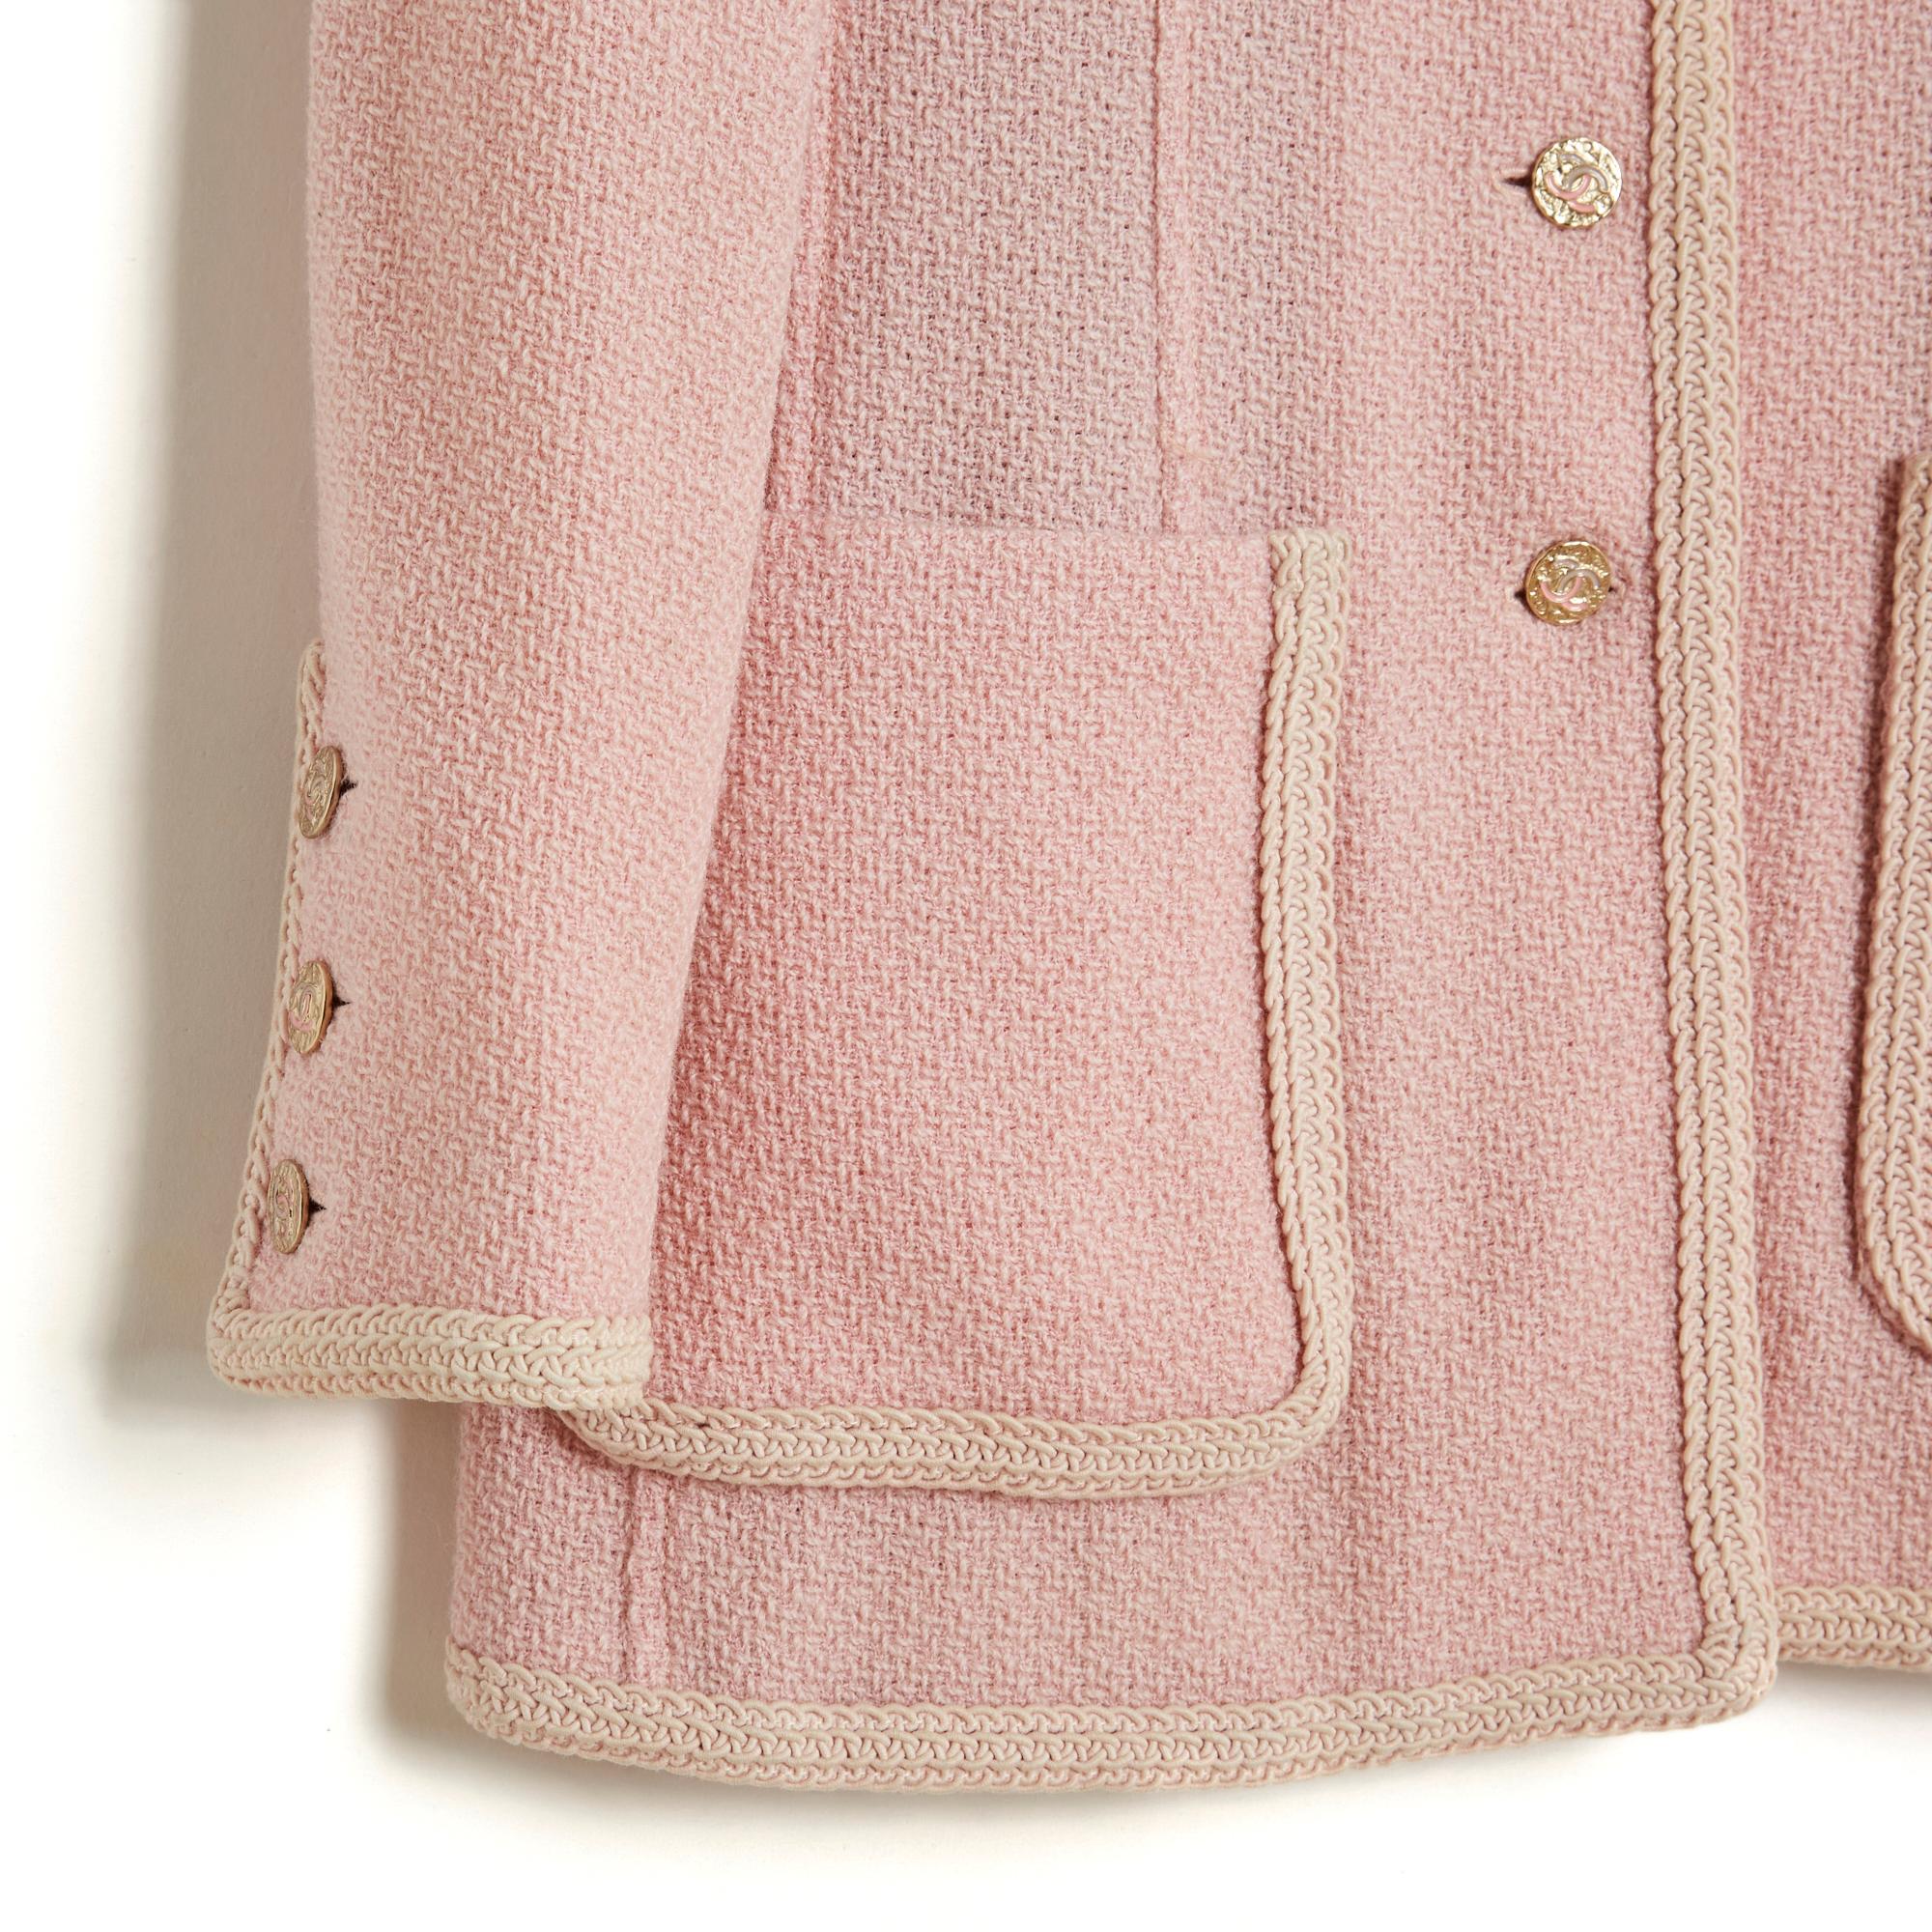 Chanel jacket circa 1994 in pale pink wool mat trimmed with ecru beige trimmings, round collar closed with 6 Chanel-branded buttons in lightly gold-plated metal, 4 patch pockets on the chest and on the hips, long sleeves each closed with 3 matching